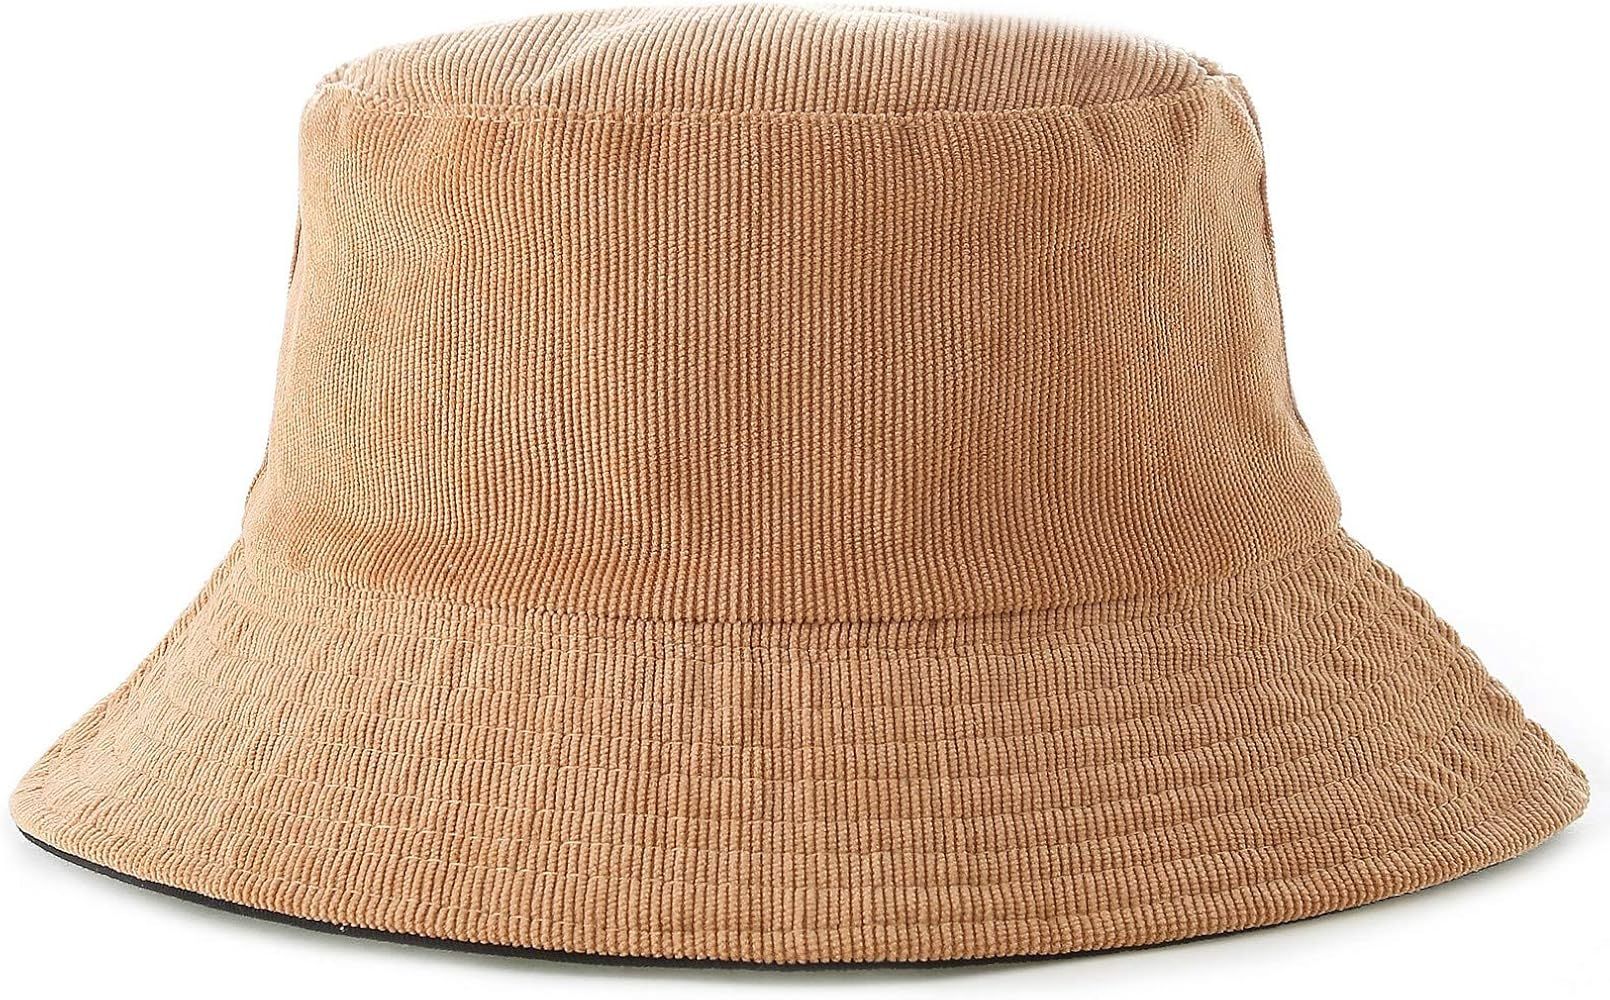 Reversible Bucket Hats for Women, Trendy Cotton Twill Canvas Leather Sun Fishing Hat Fashion Cap Pac | Amazon (US)